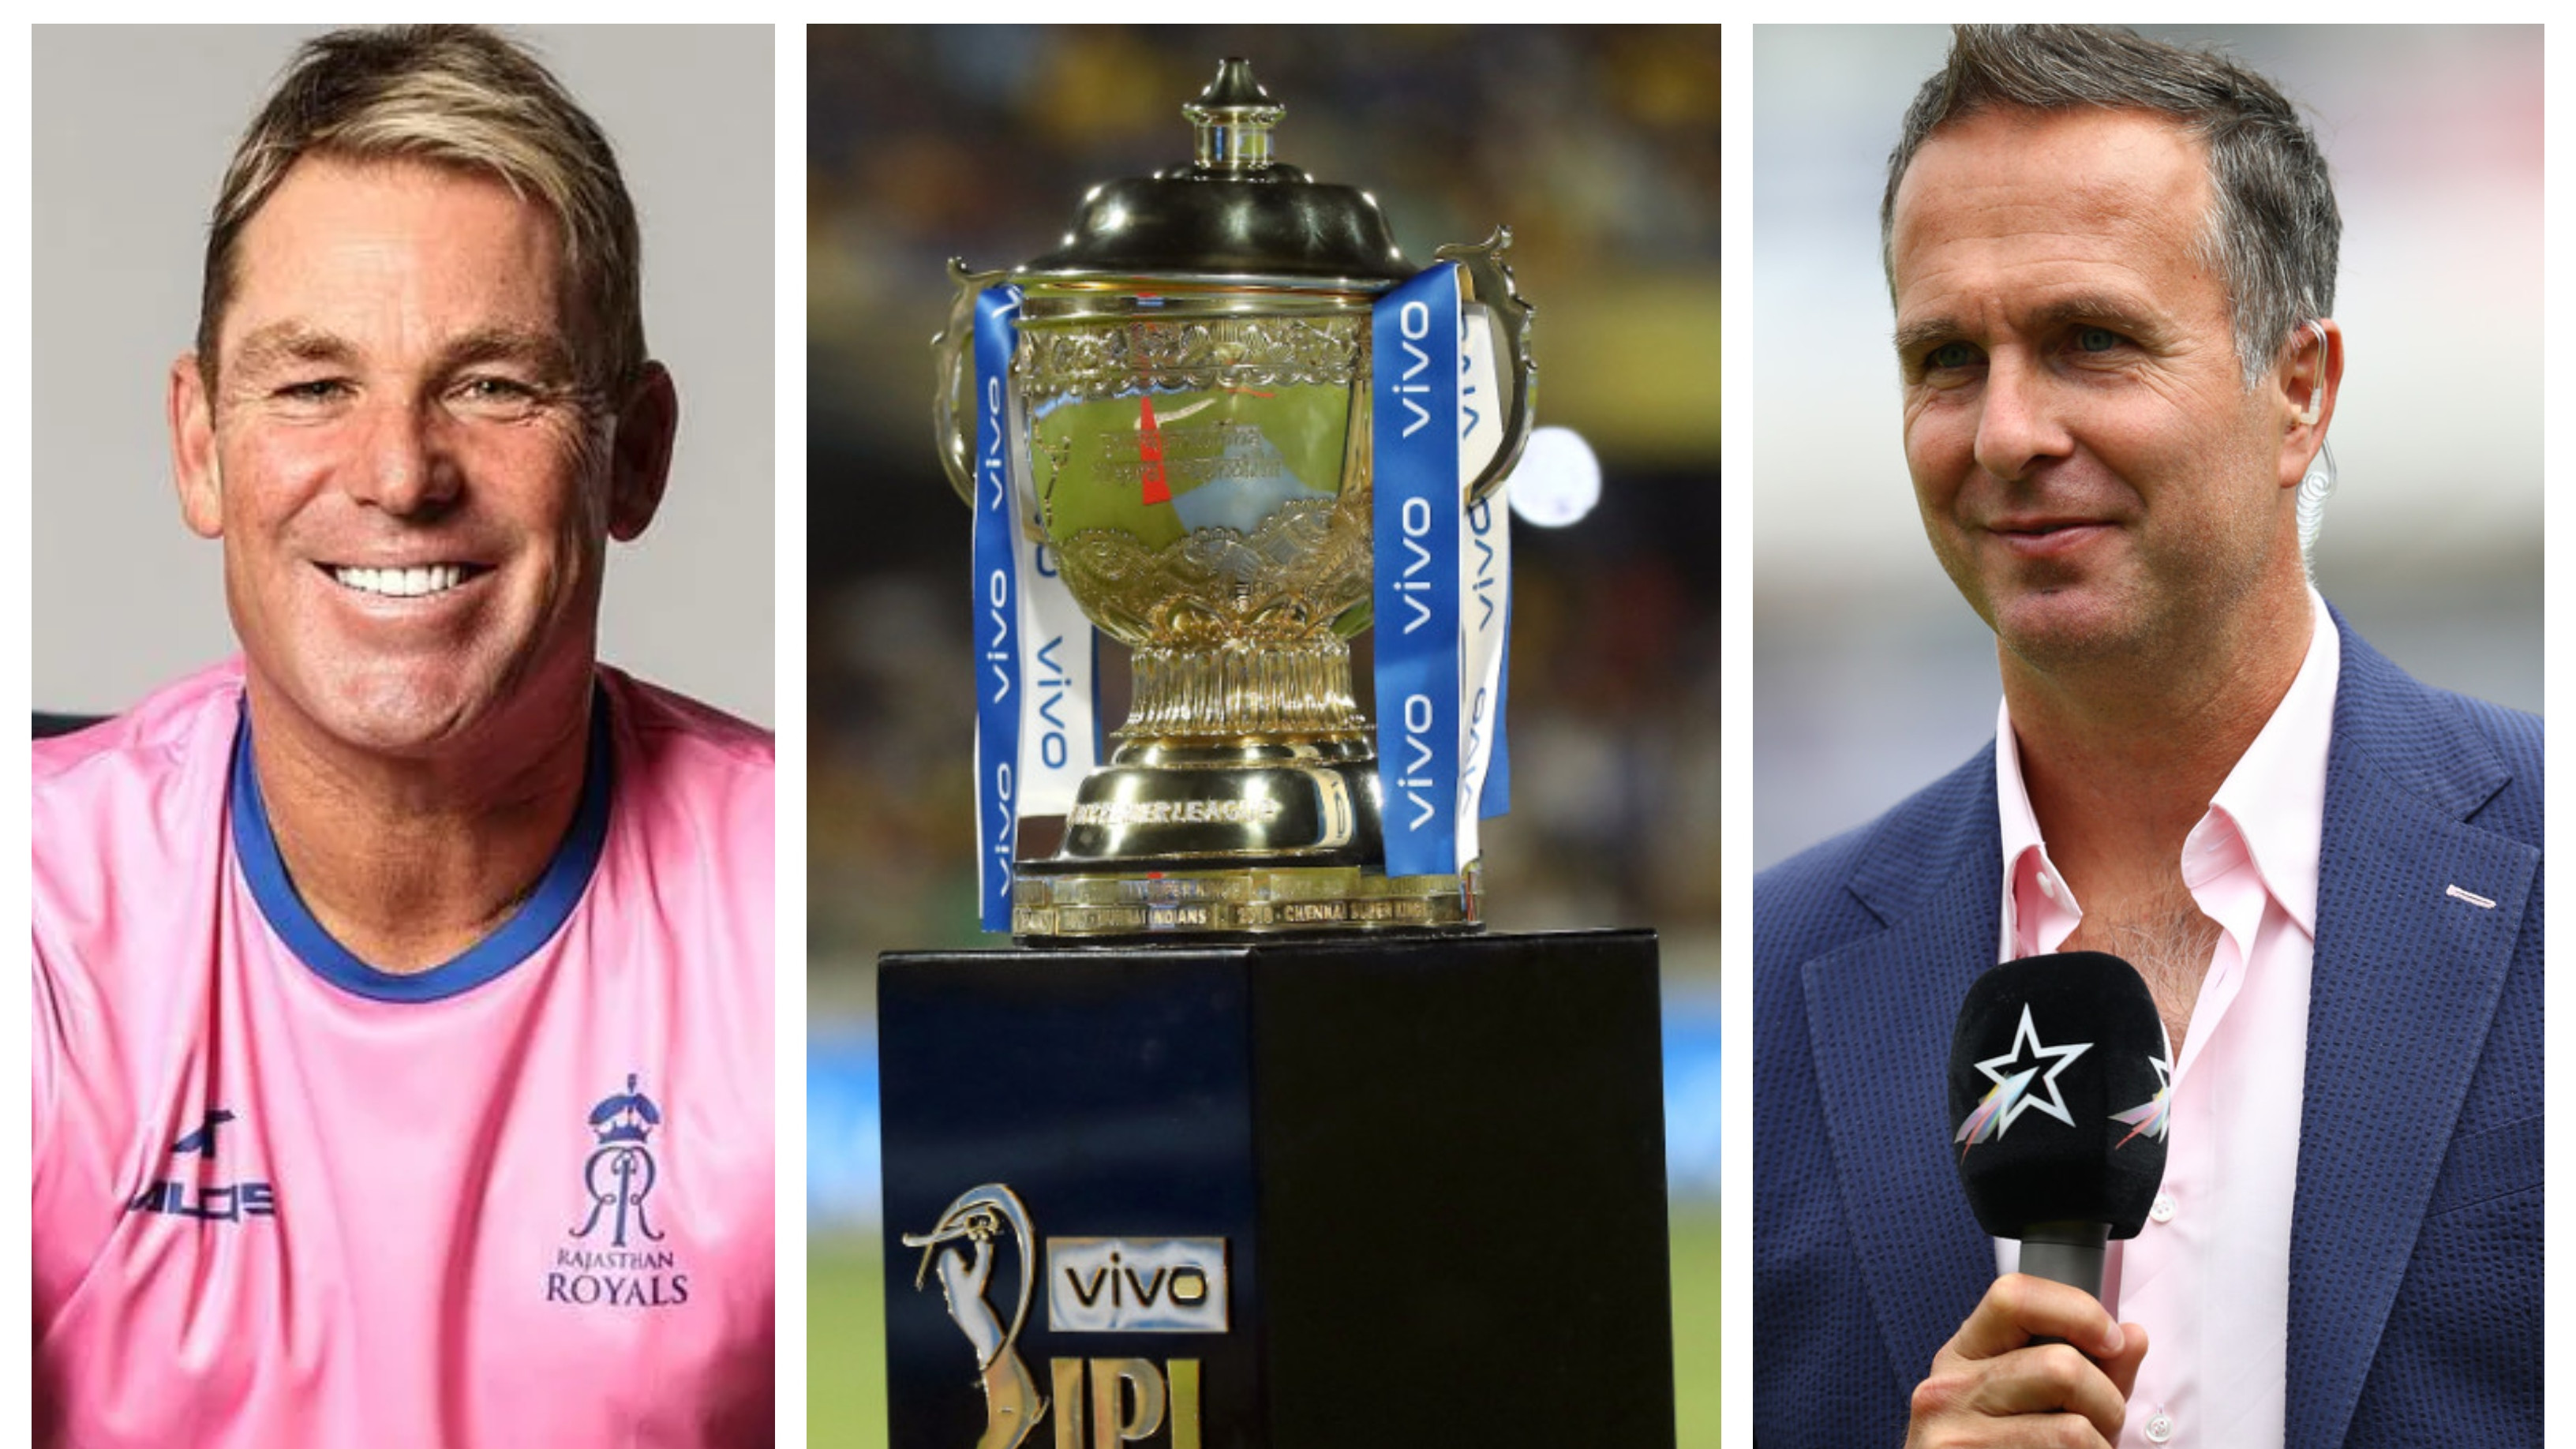 “Staggering amounts of money”, Warne and Vaughan amazed by whopping bids for two new IPL teams